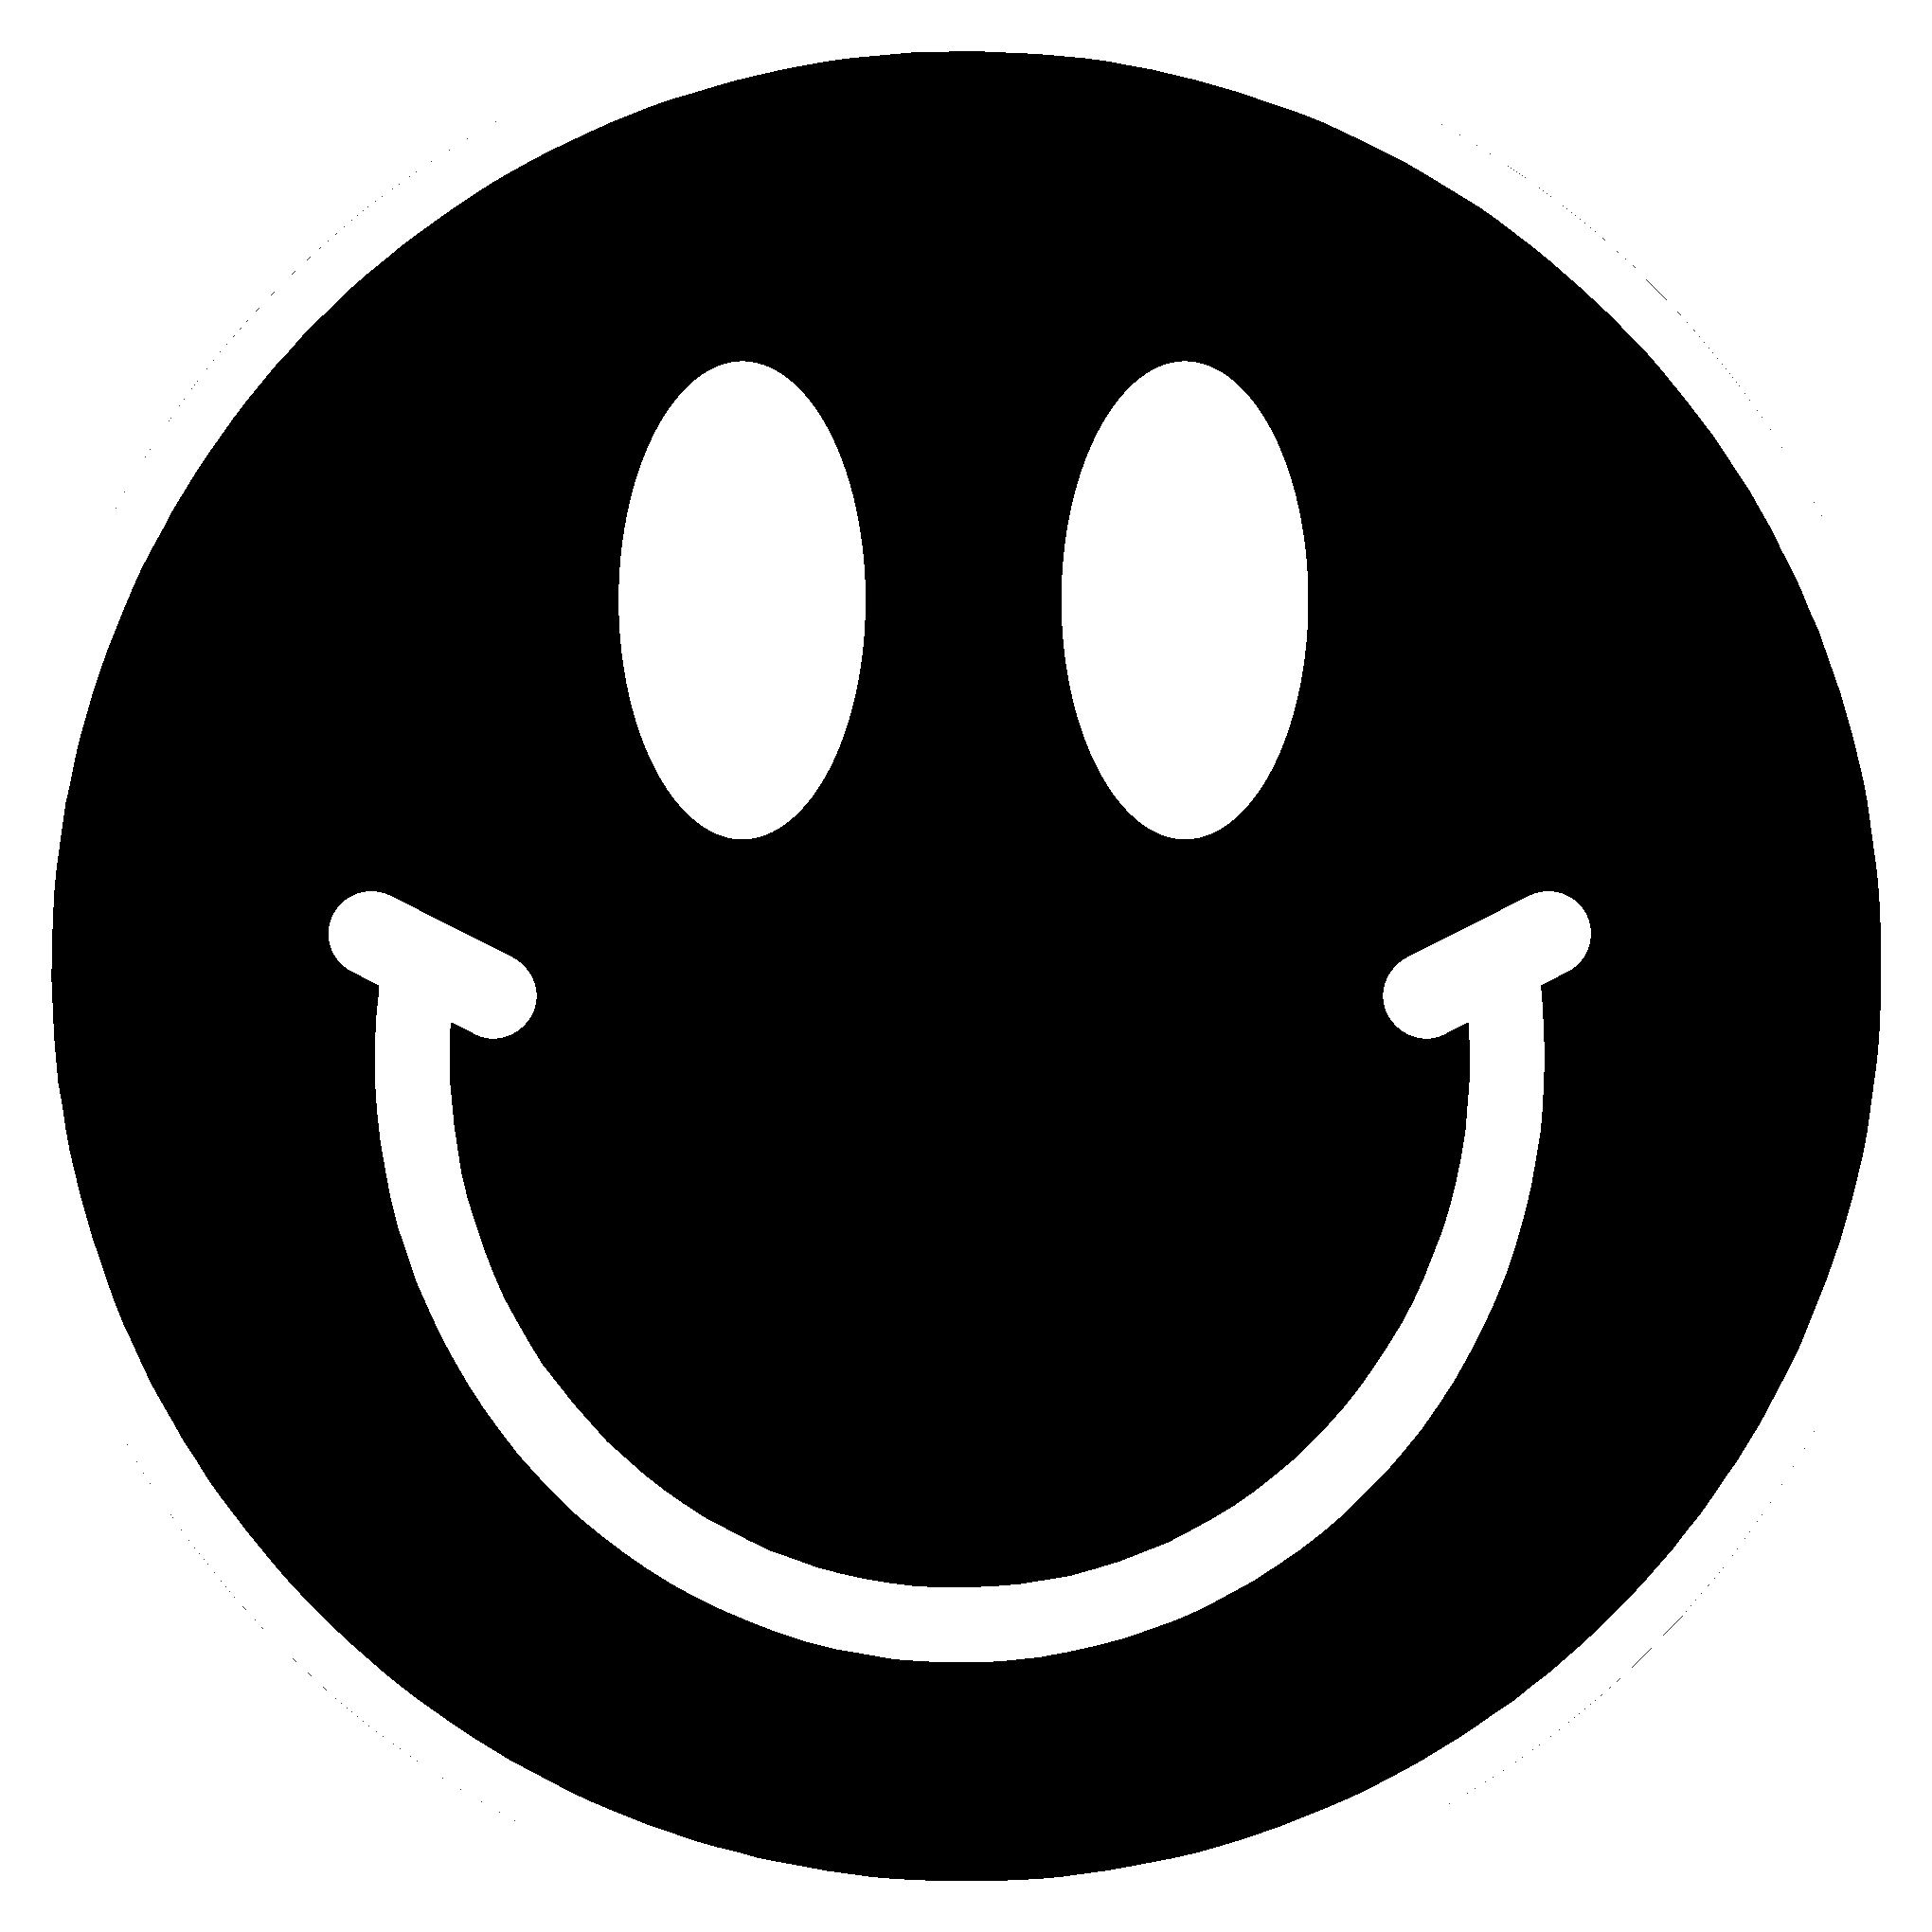 smiley face black background cliparts that you can download 2040x2040